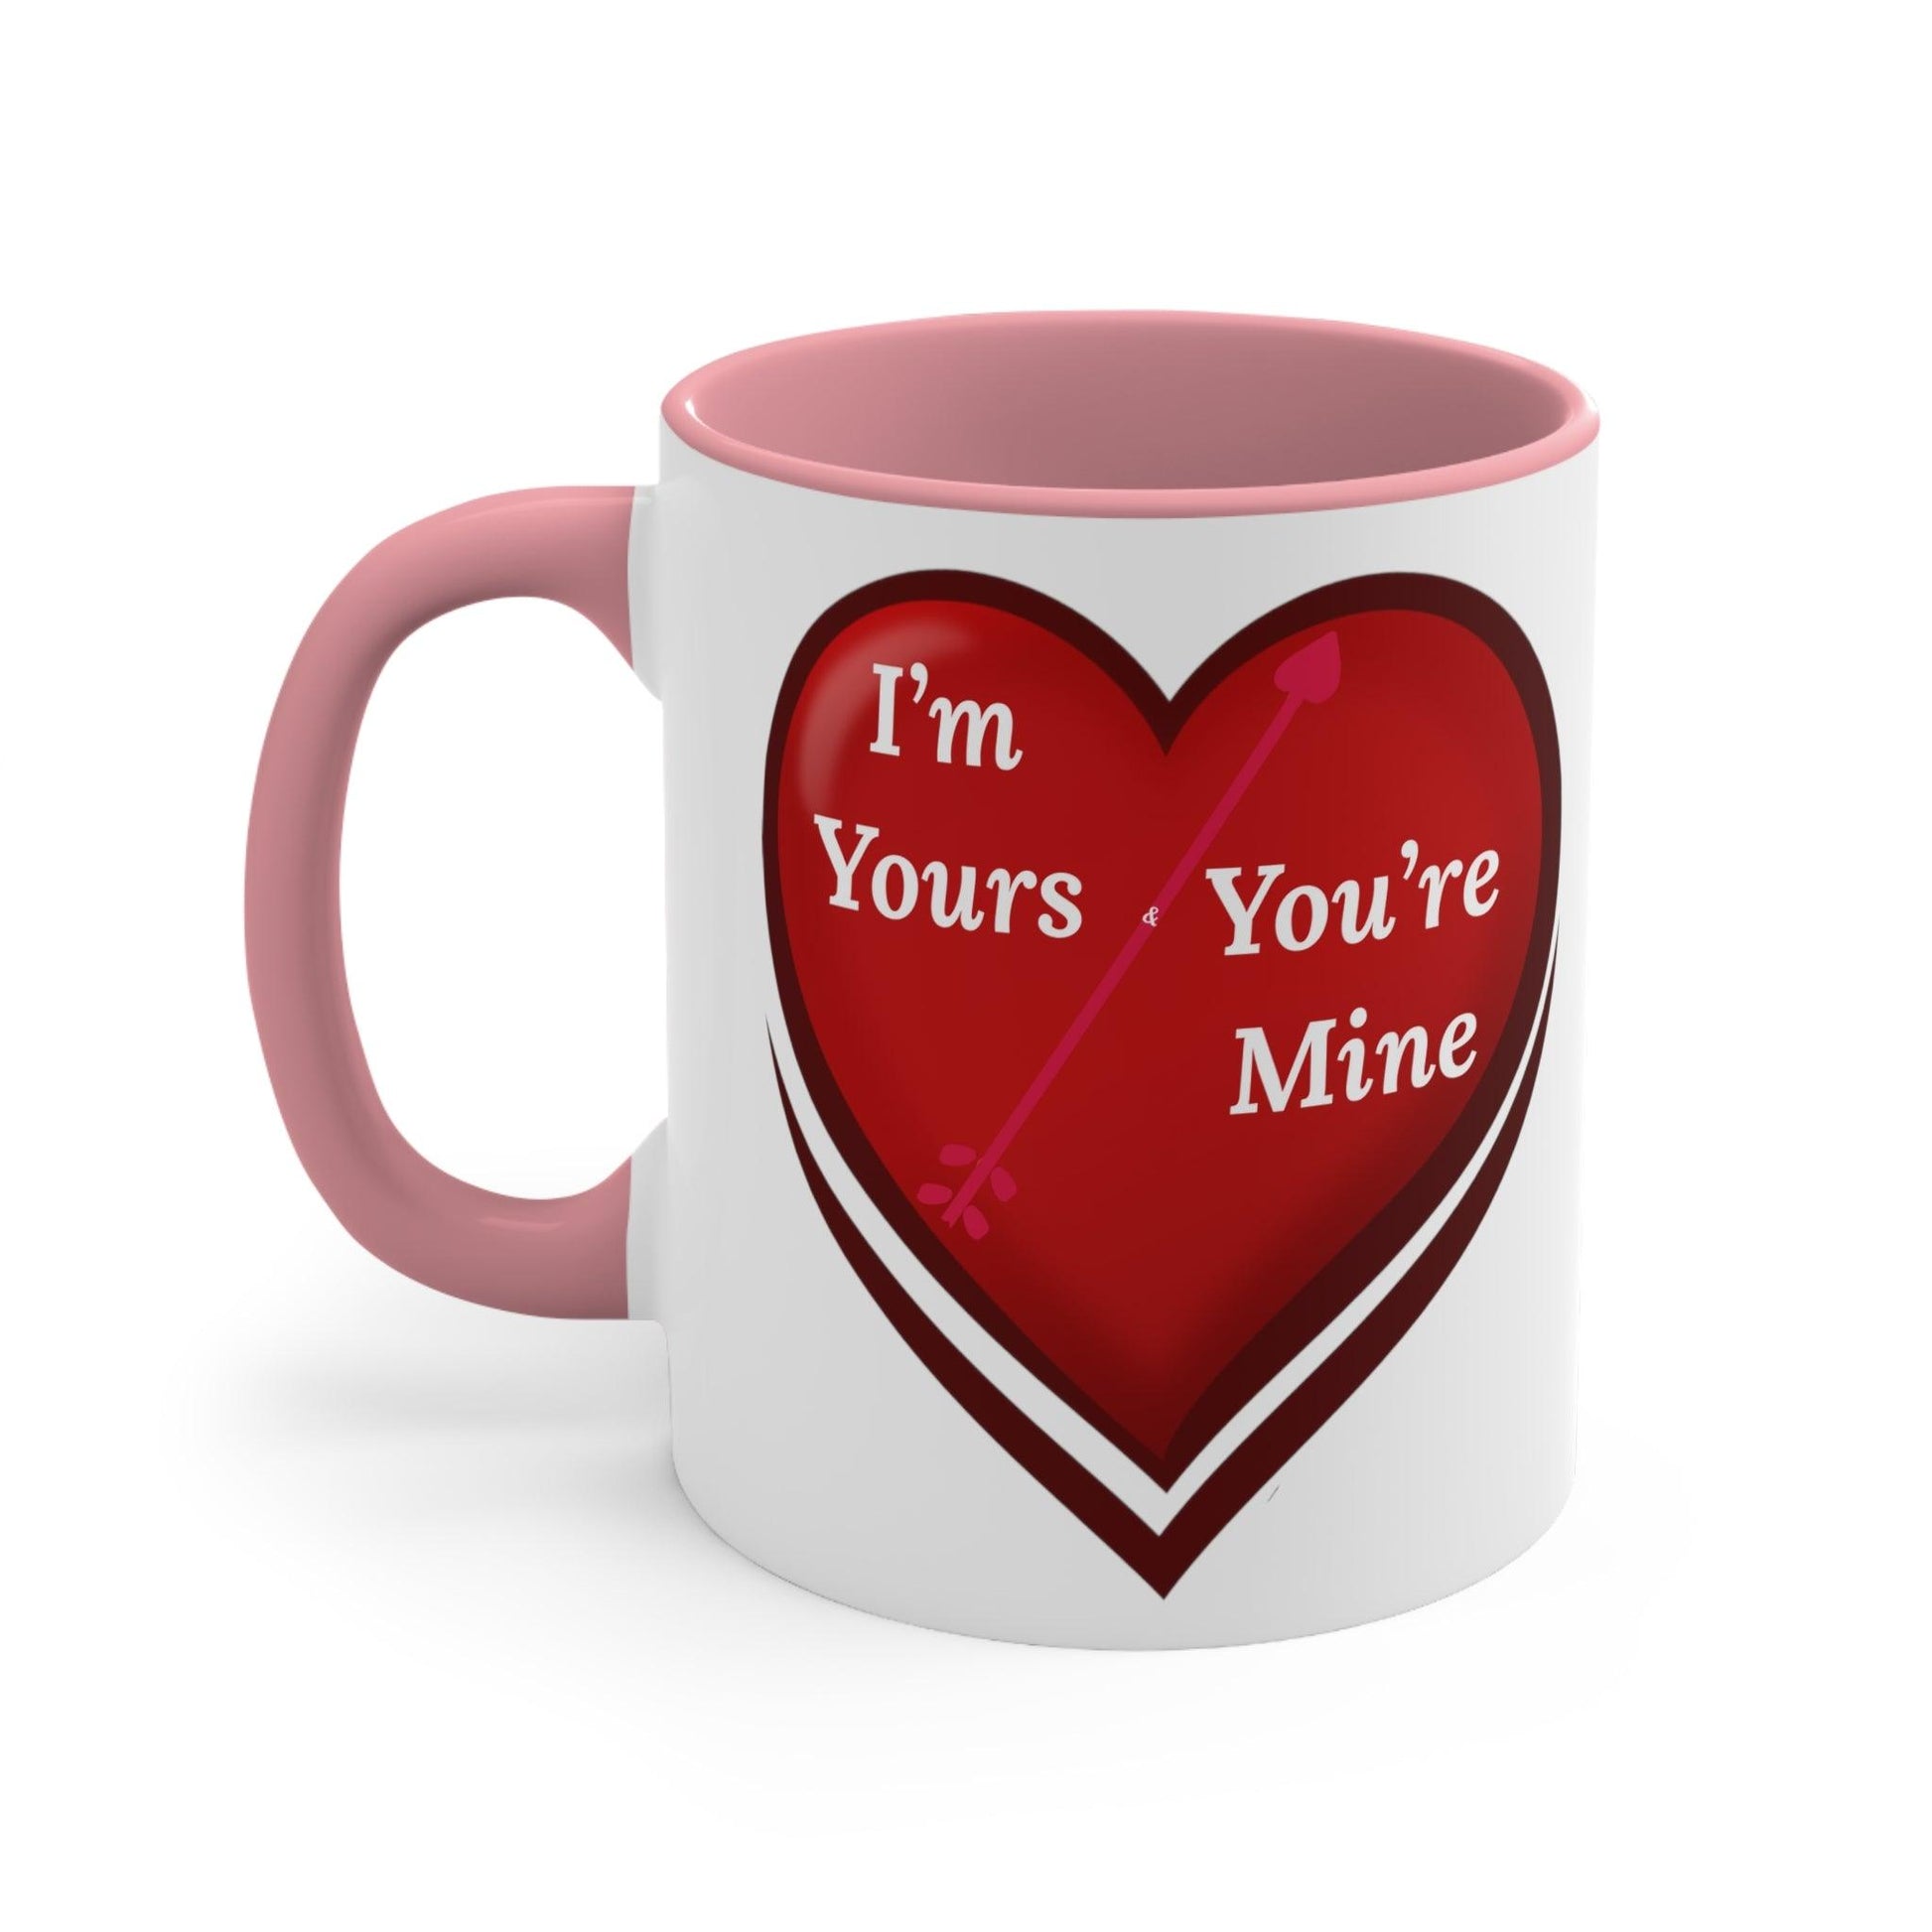 I'm Yours and You're Mine with Heart Mug, 11oz - Giftsmojo